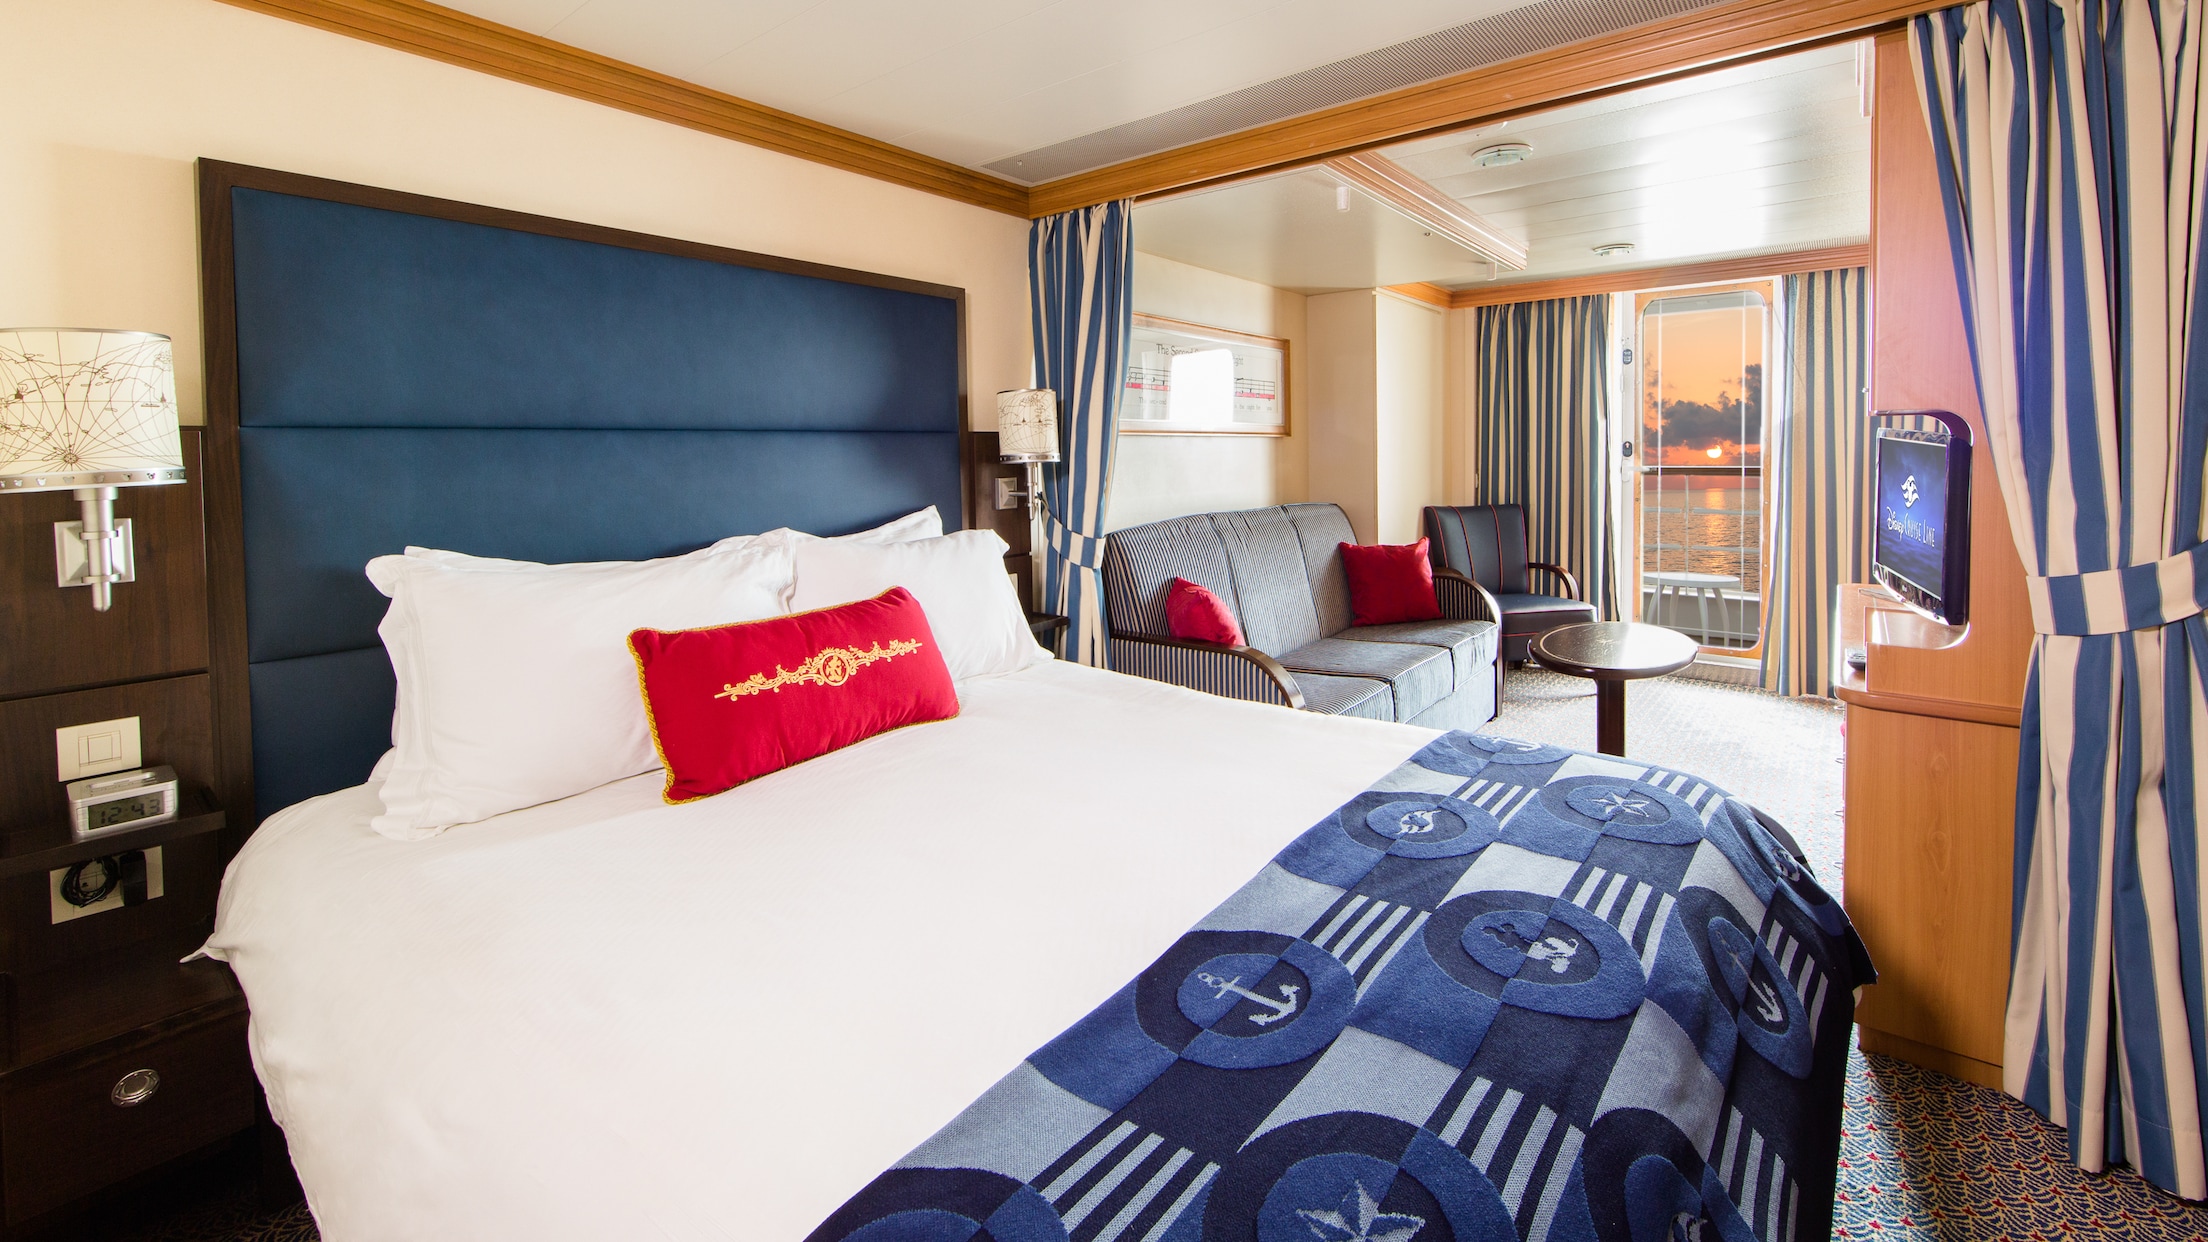 pictures of disney cruise rooms